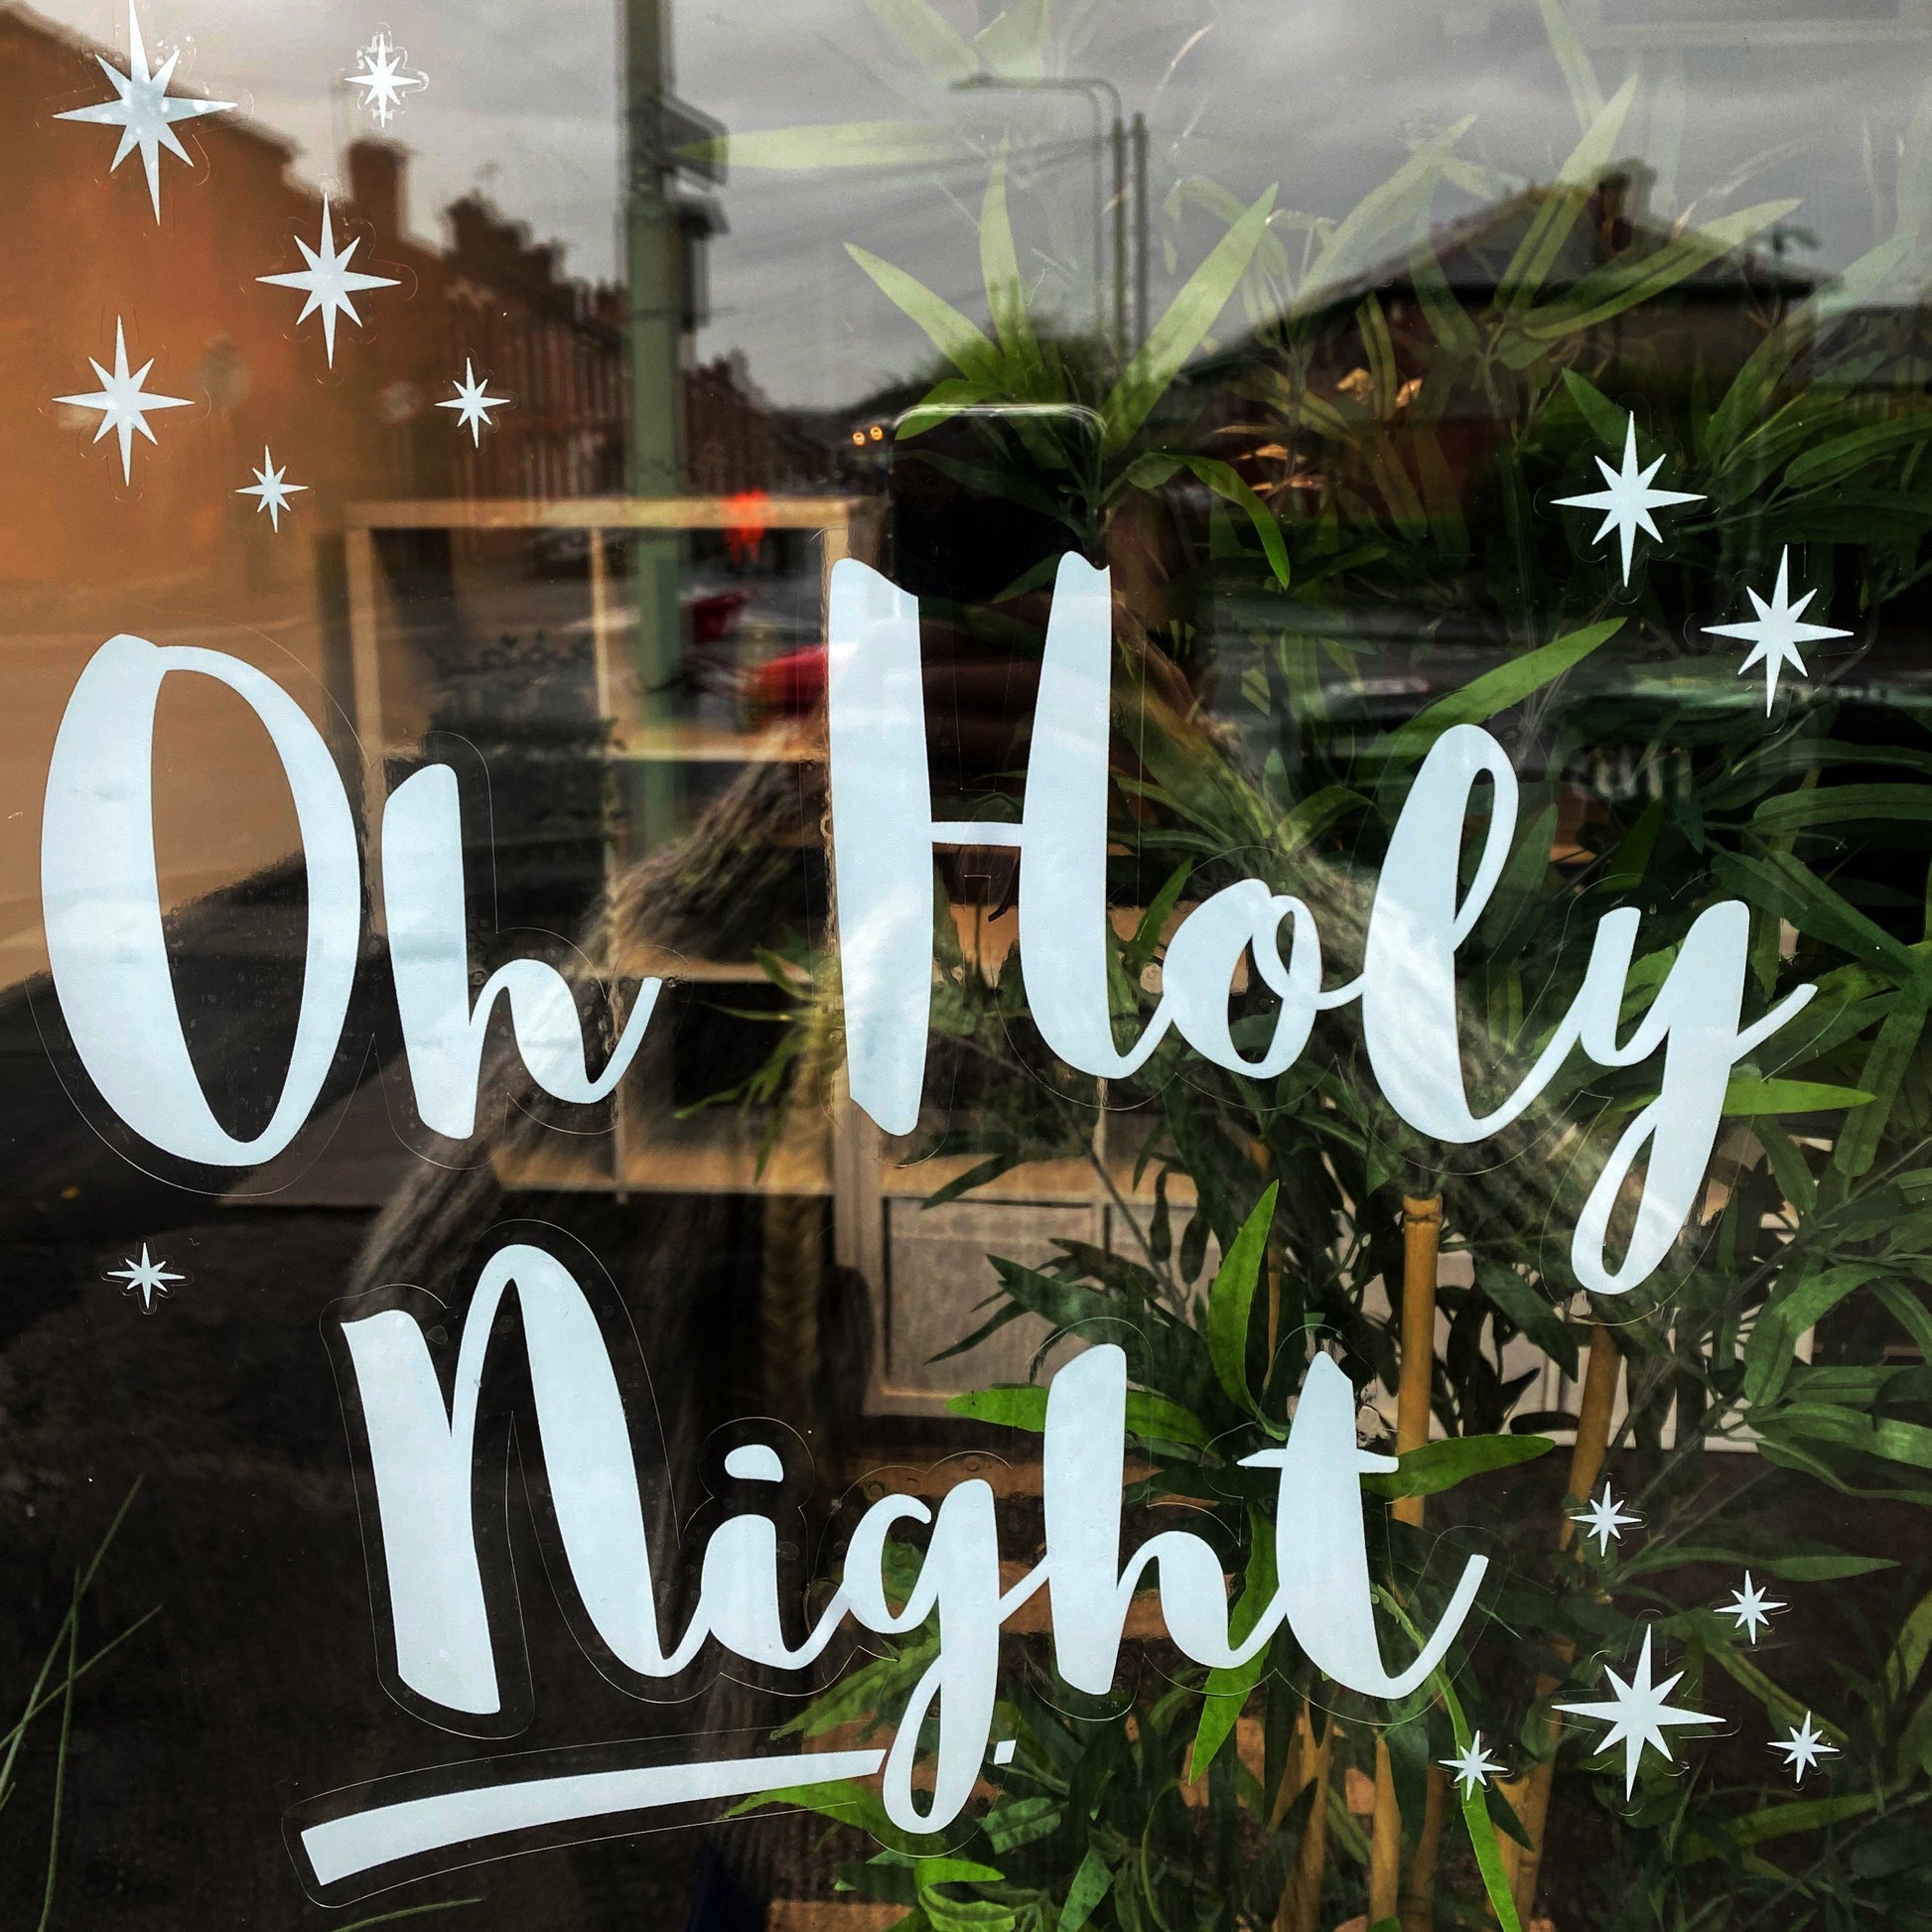 Decal Christmas Oh Holy Night Window Decal Dizzy Duck Designs